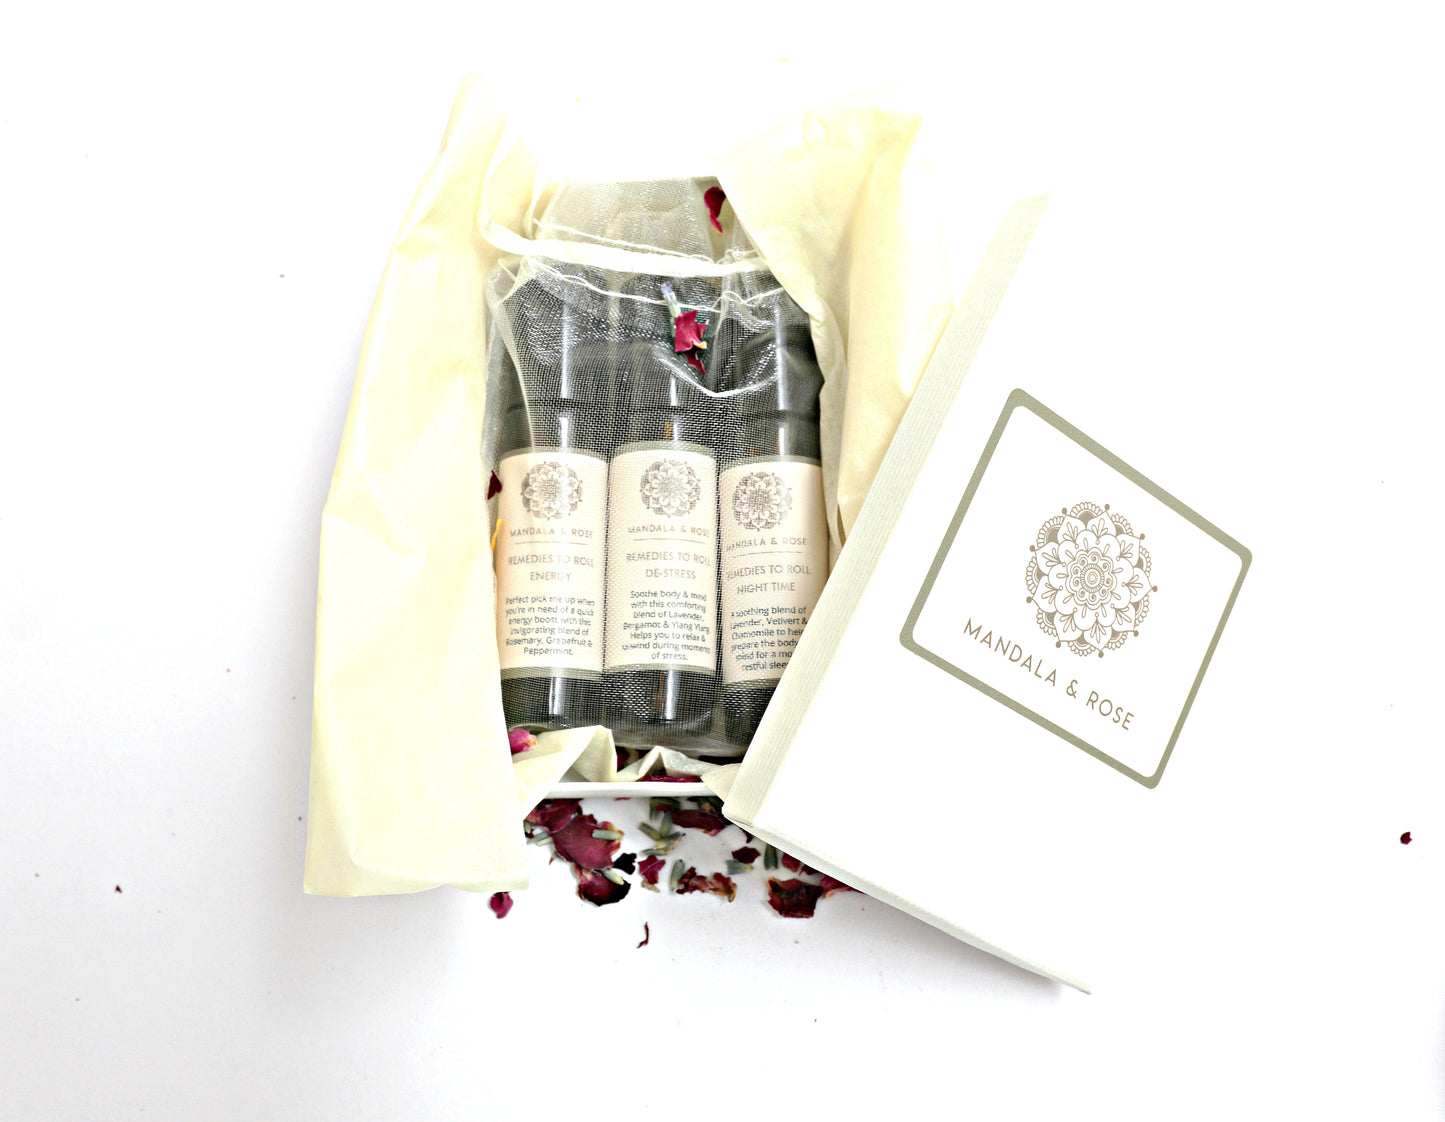 Remedies To Roll Trio Gift Set